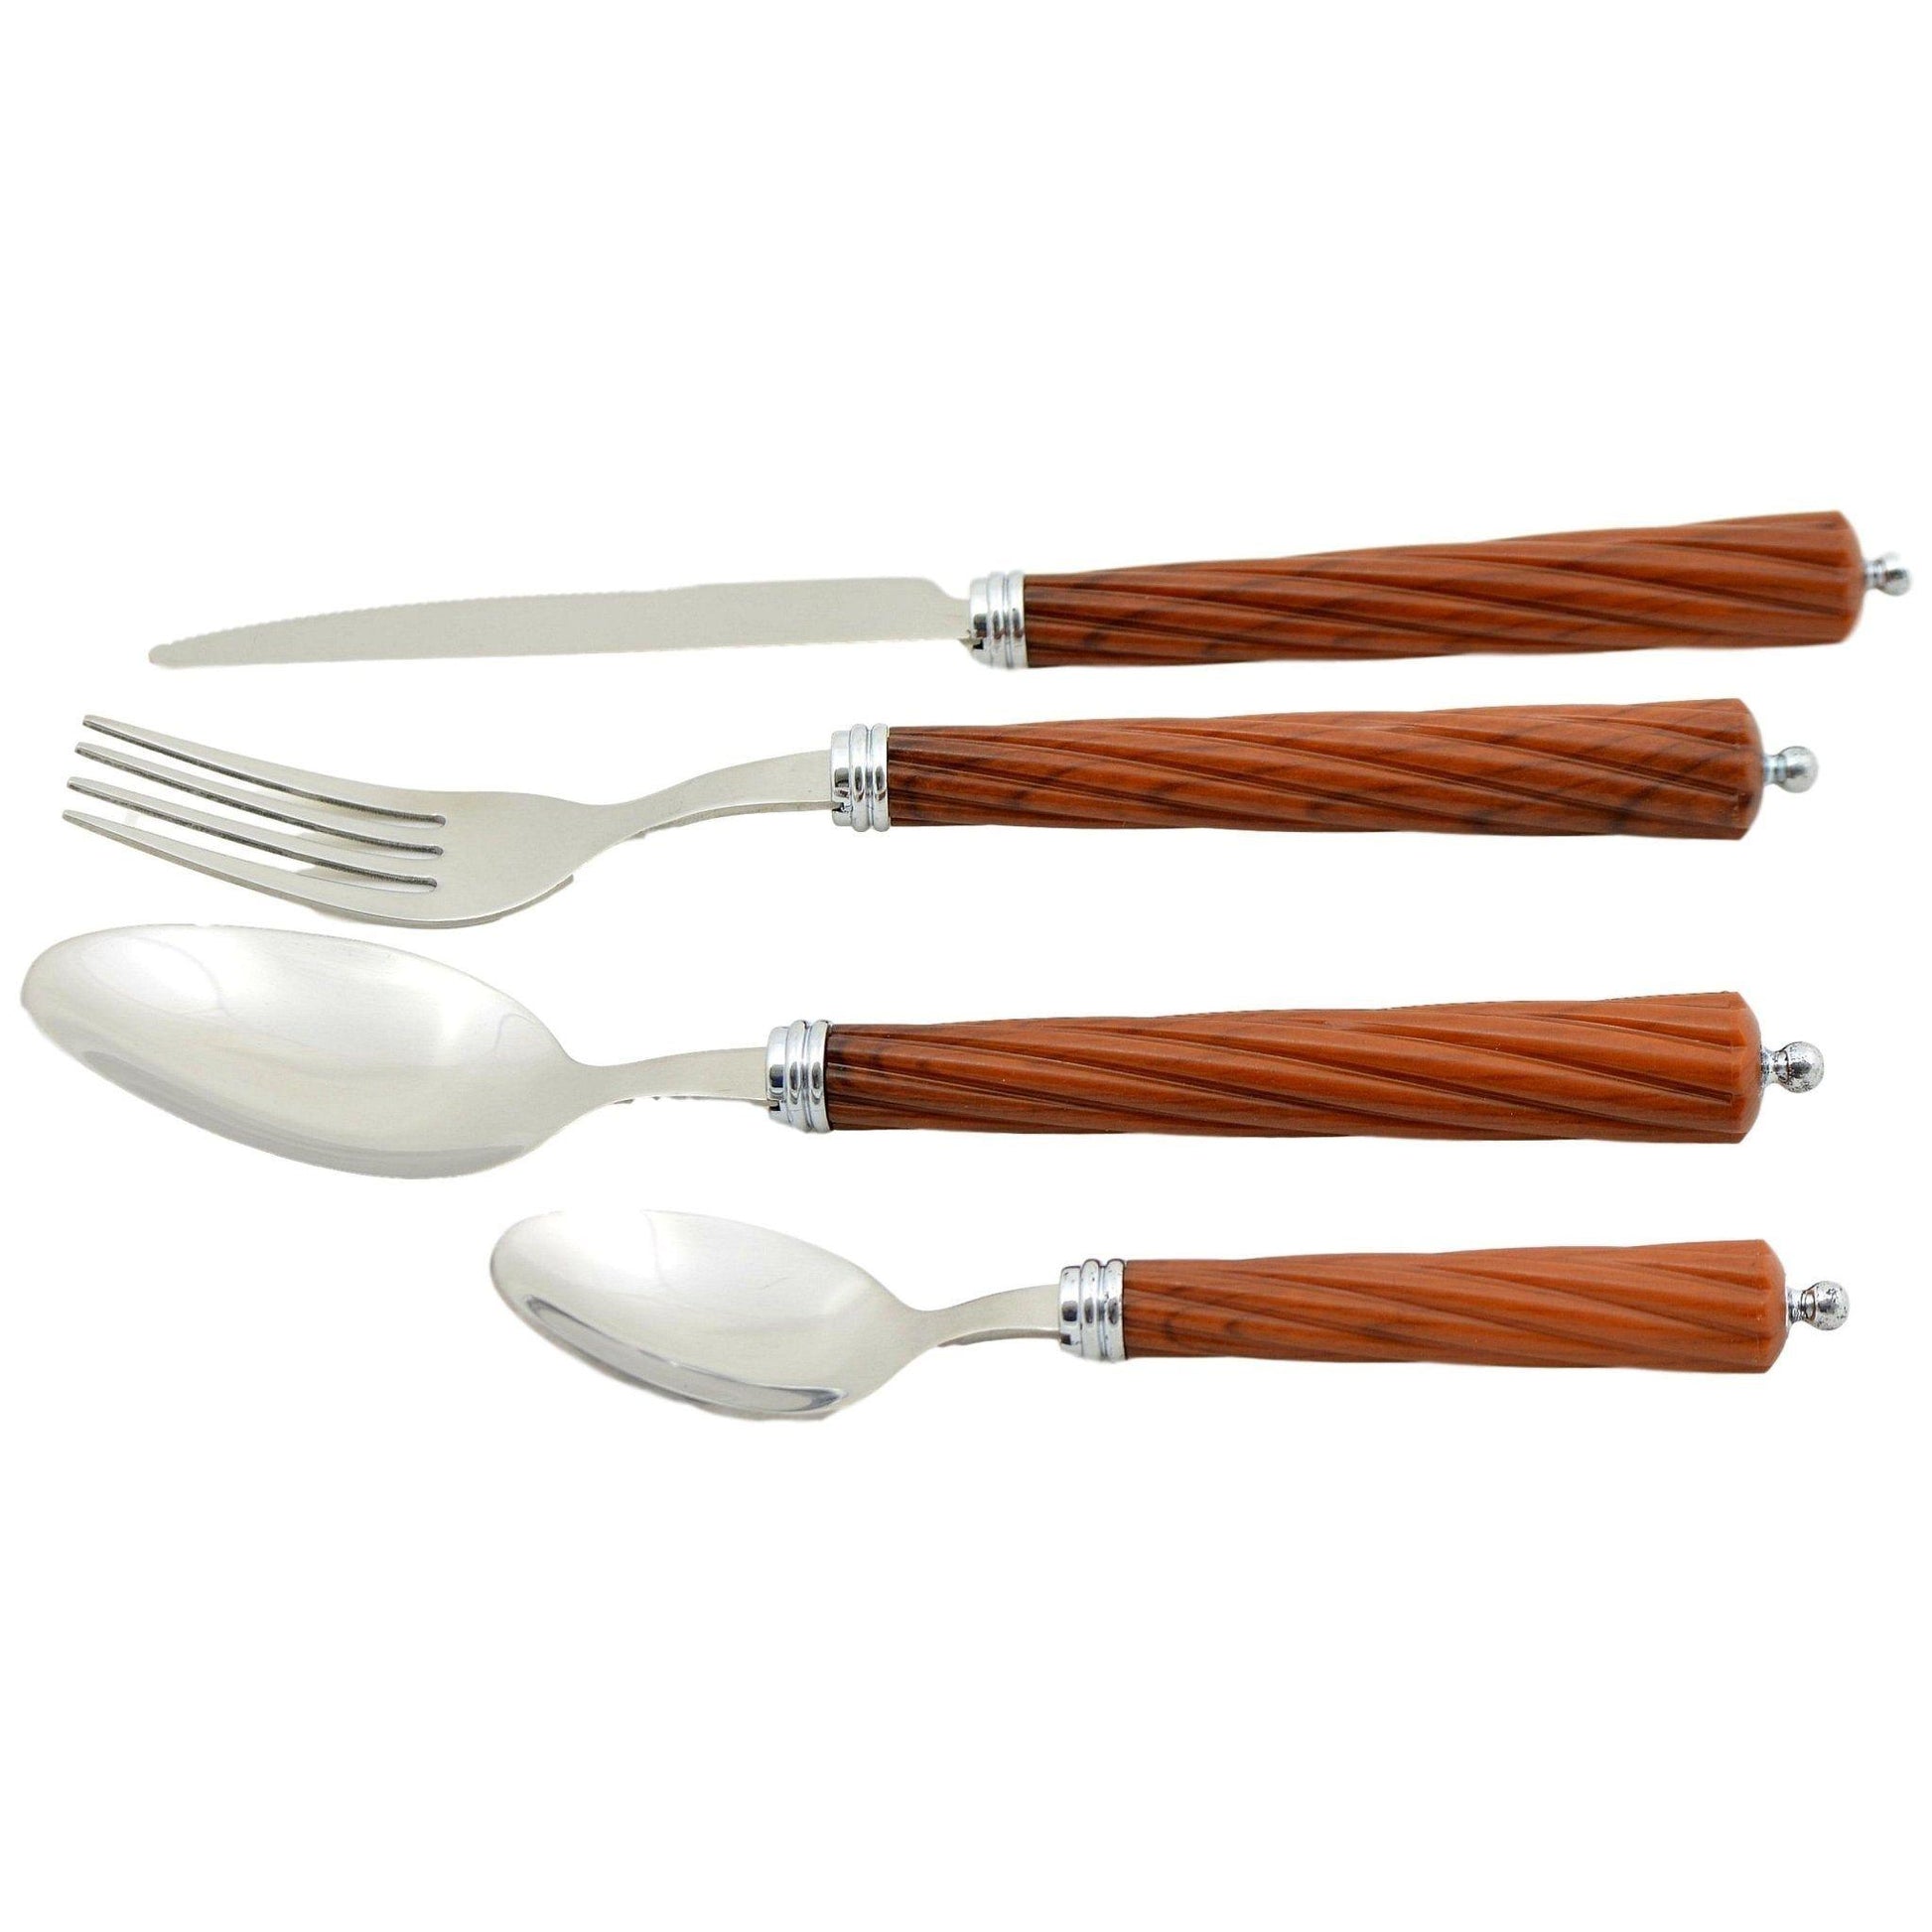 Flatware with Wood Handles - Nature Home Decor